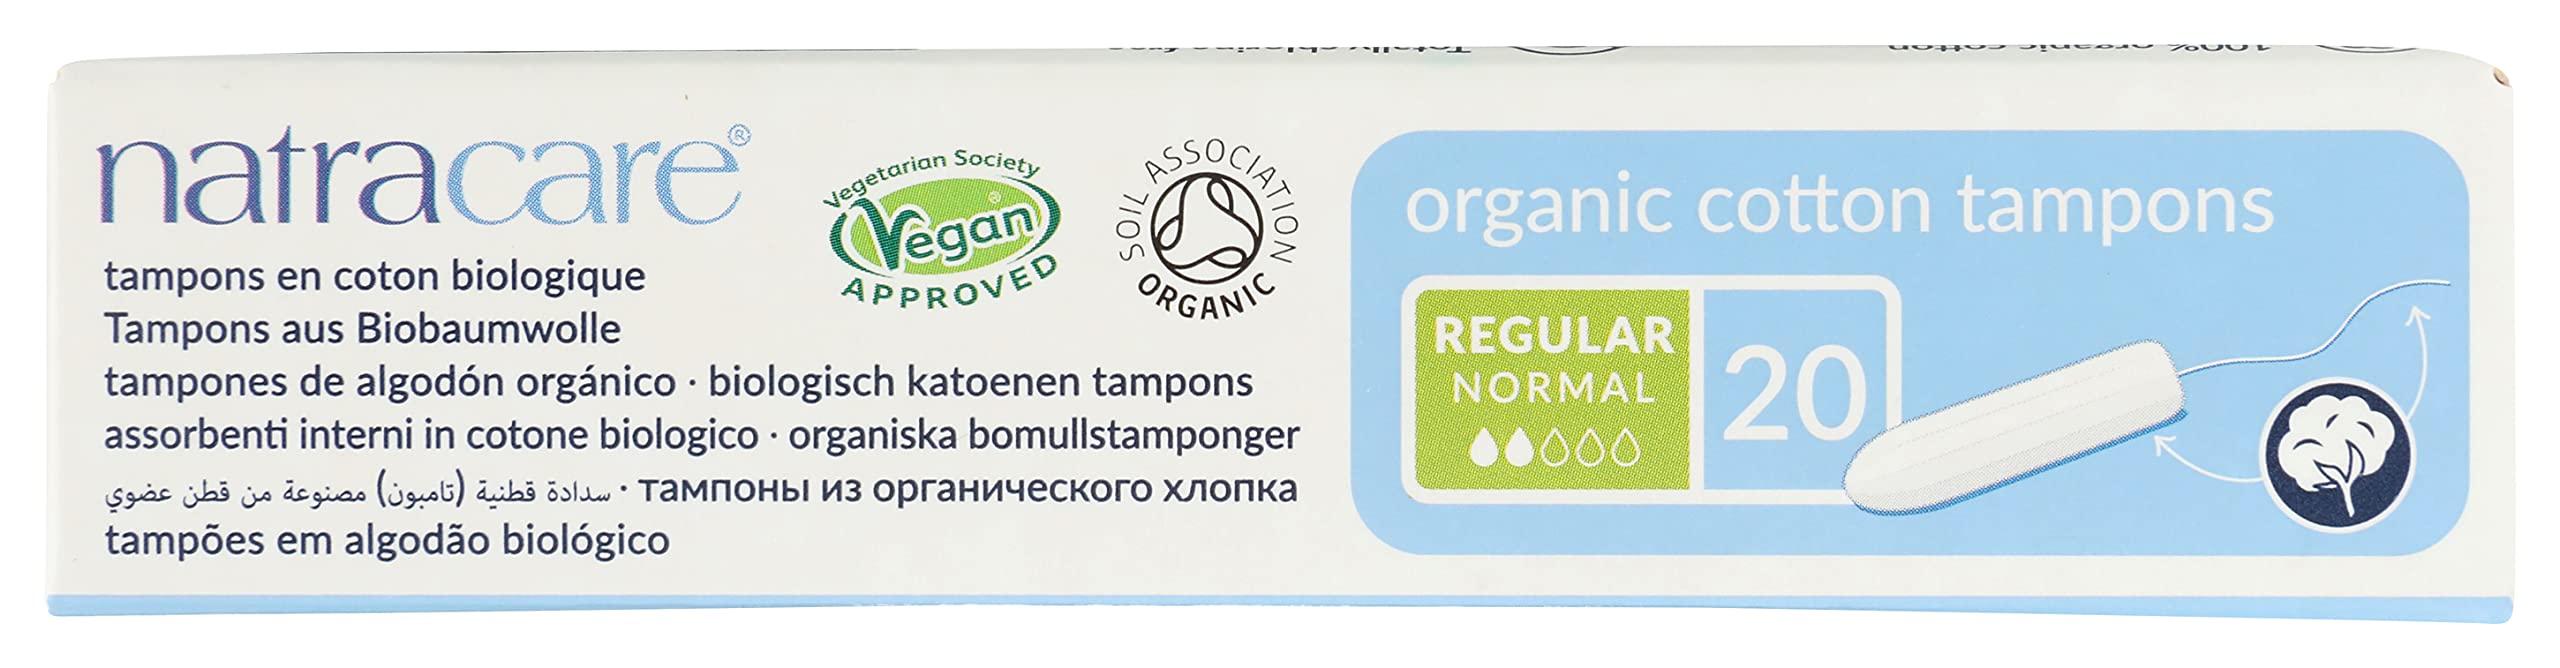 Natracare Non-Applicator 100% Organic Cotton Tampons, Regular, Totally Chlorine Free, Biodegradable and Compostable (12 Pack, 240 Tampons Total)